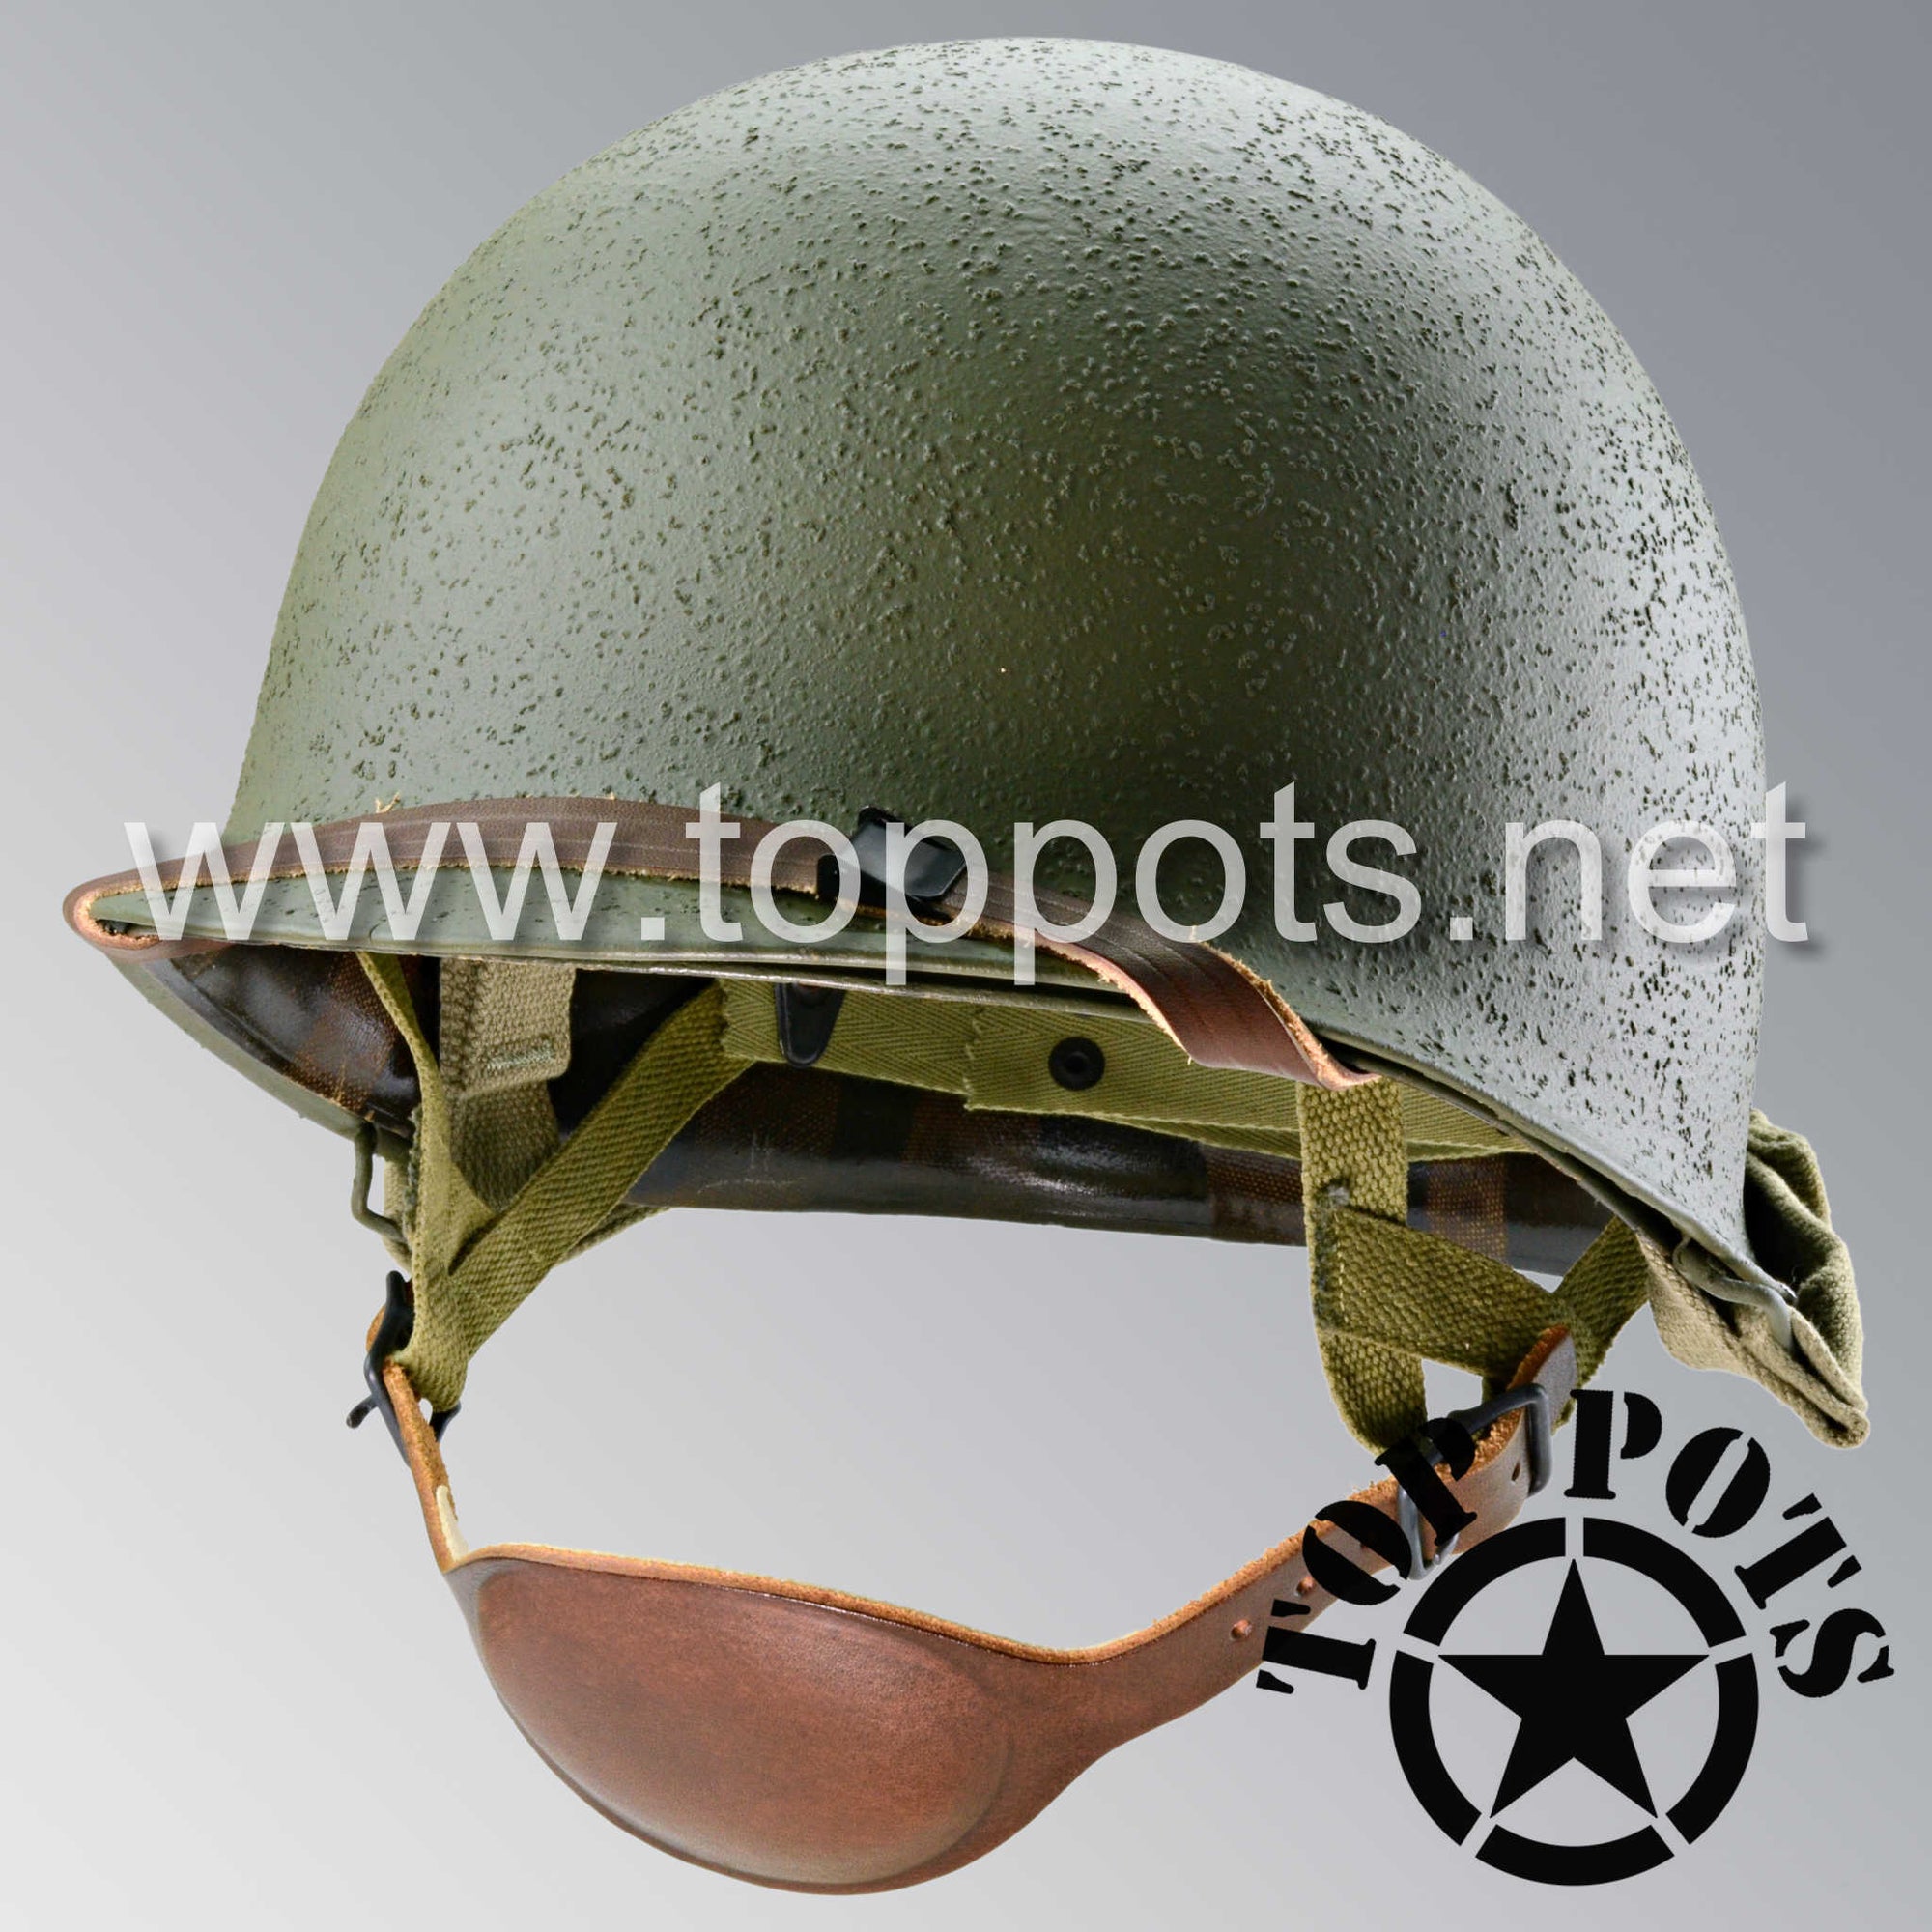 WWII US Army Restored Original M1C Paratrooper Airborne Helmet Swivel Bale Shell and Liner with Inland A Straps and Officer Emblem